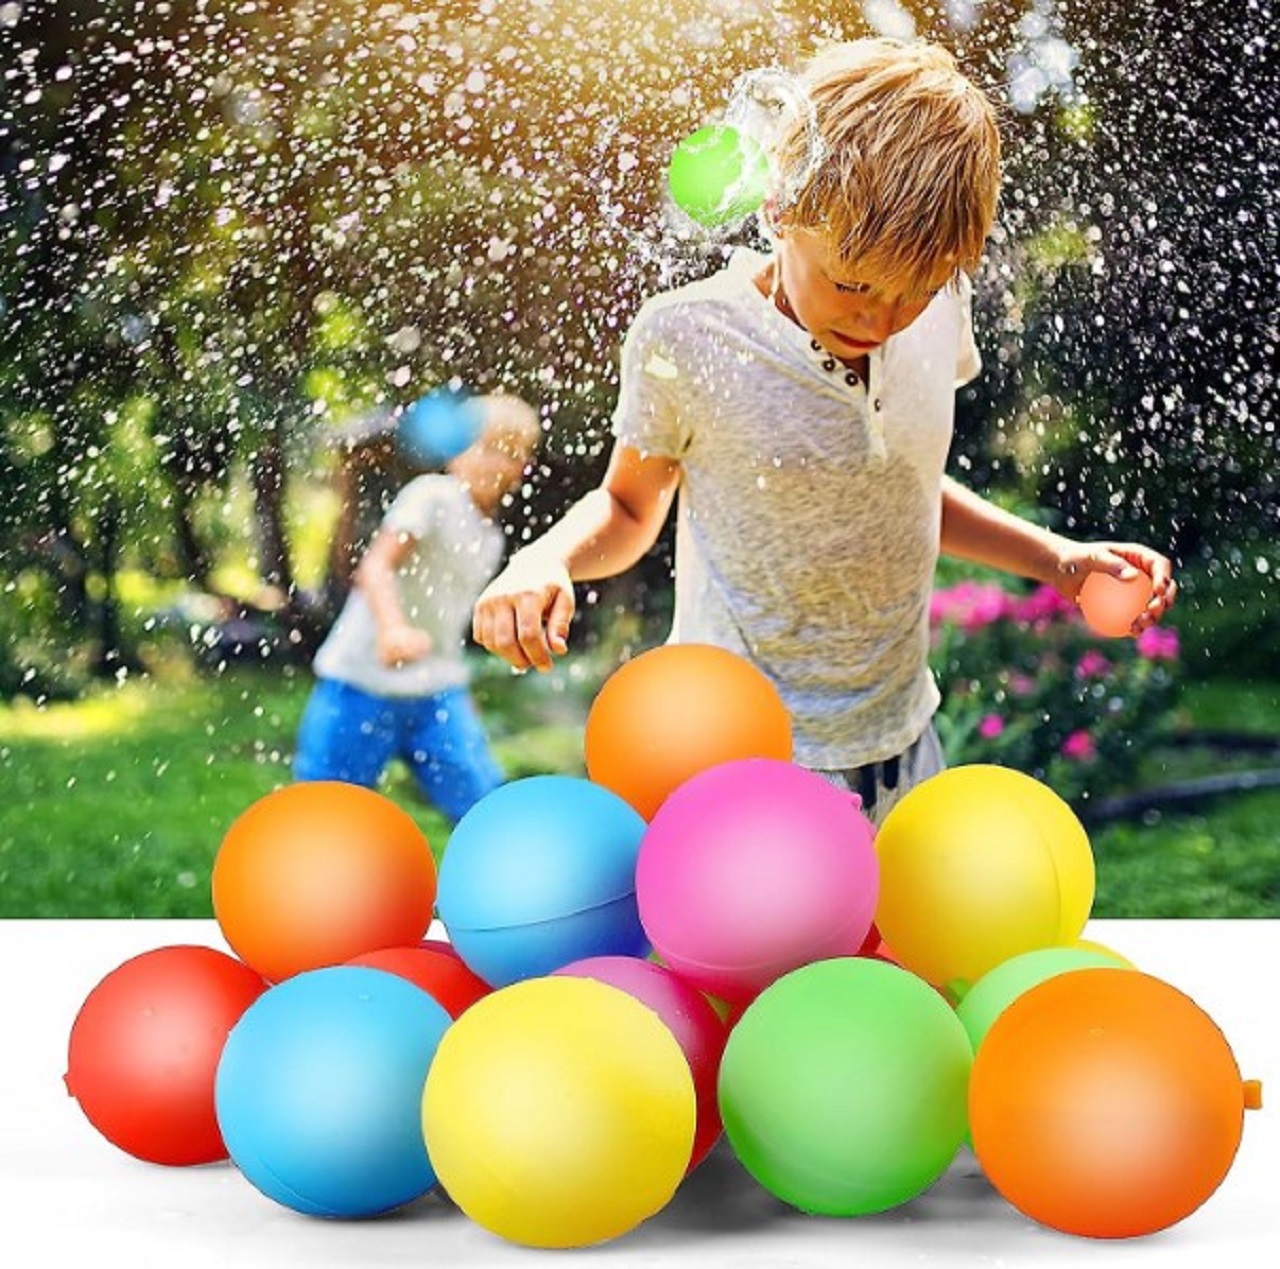 Versatile World of Hiliop's Latex Free Reusable Water Balloons